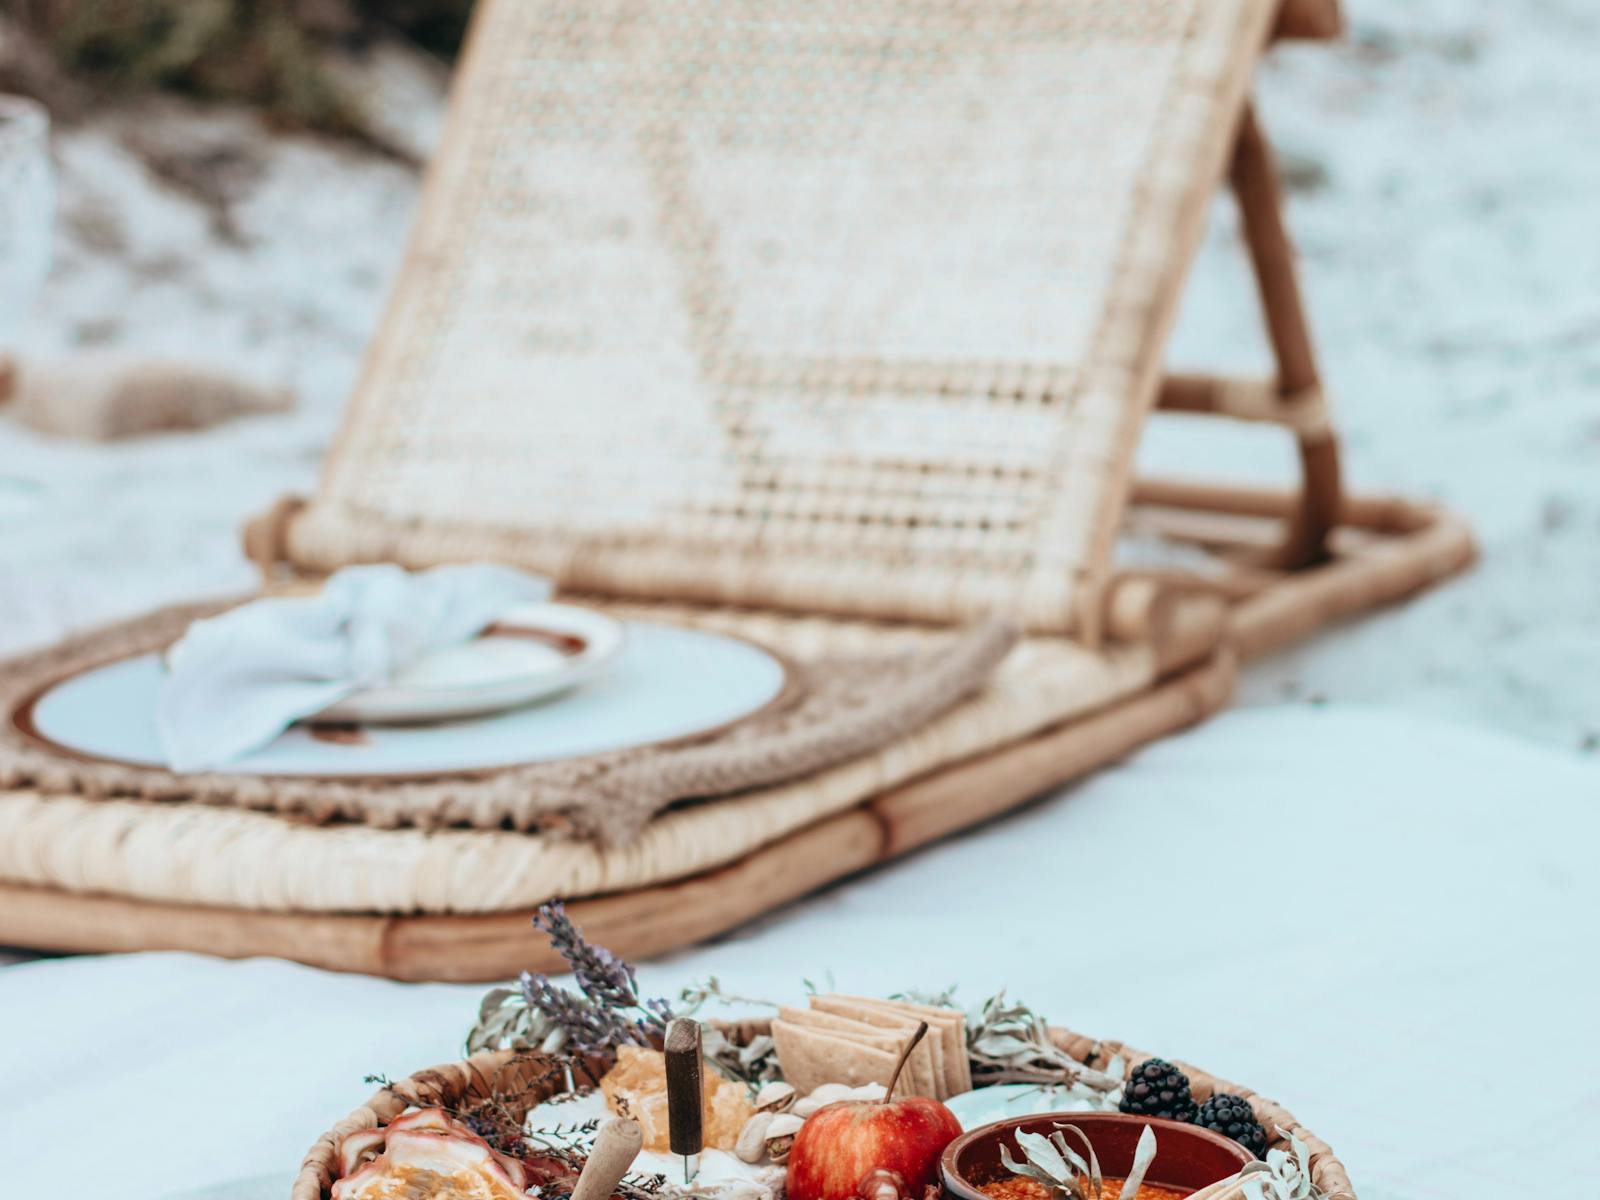 Beach picnic with wicker chair and gourmet platter